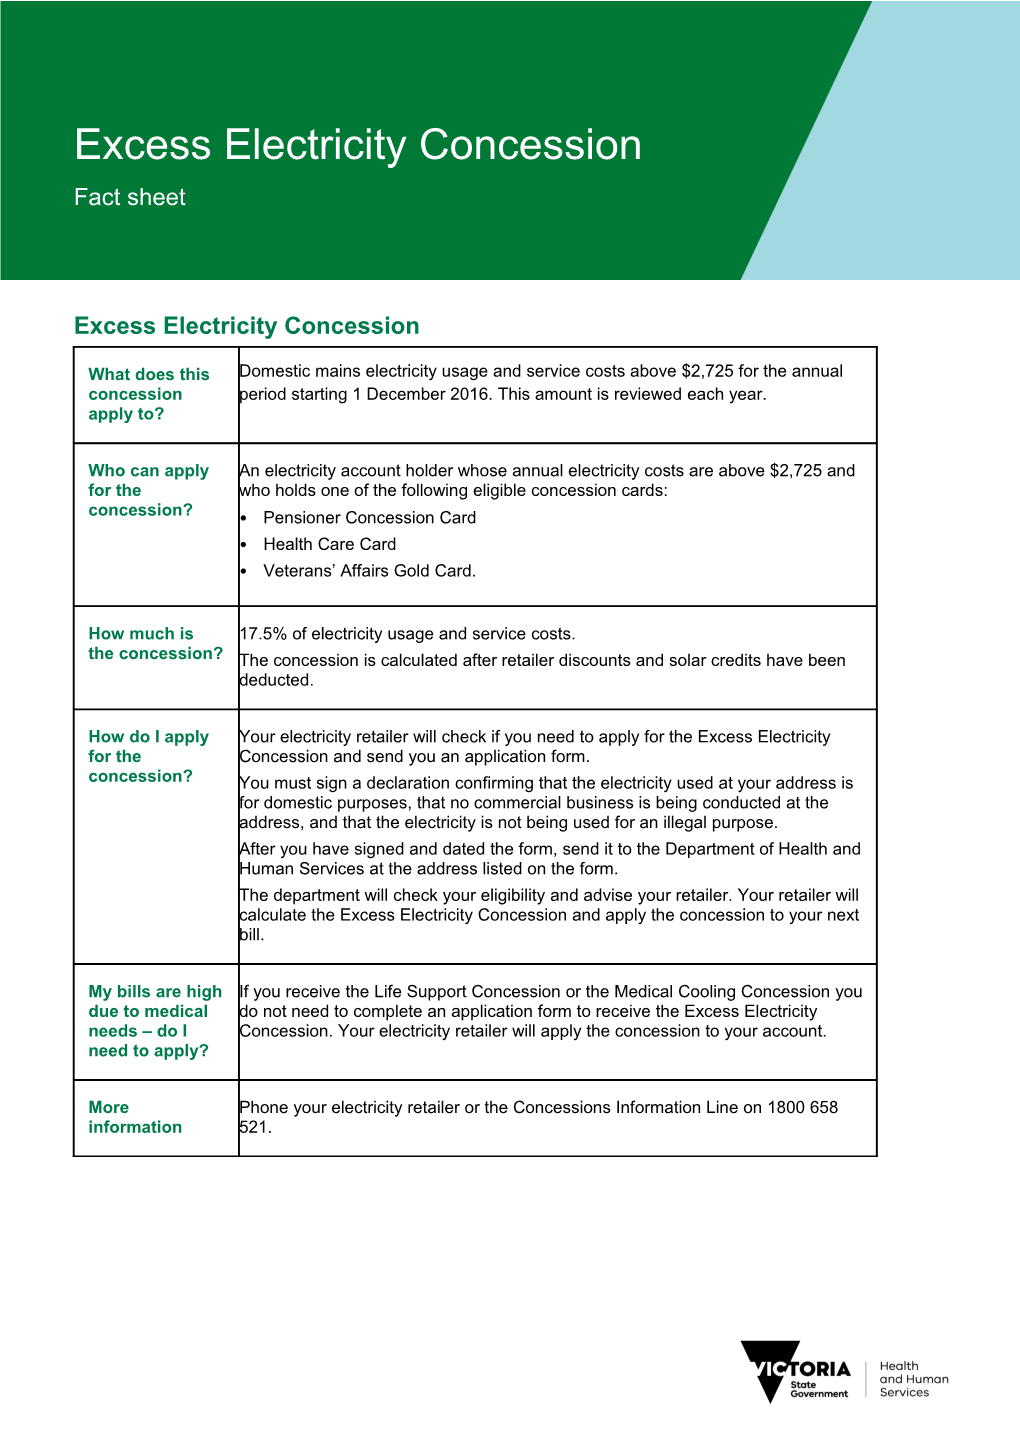 Excess Electricity Concession Fact Sheet